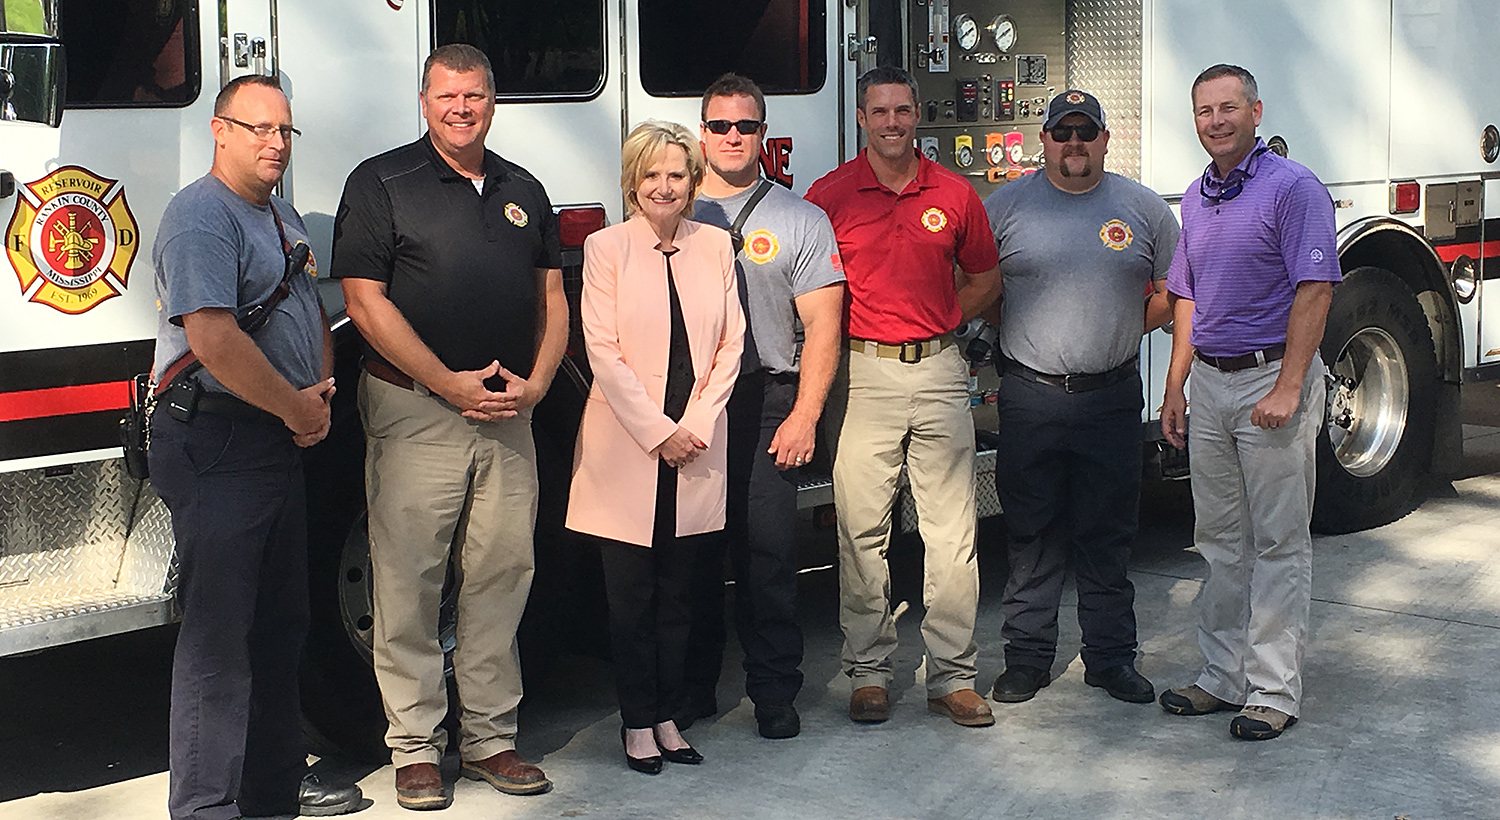 Senator Hyde-Smith stops in Brandon and visits members of the Reservoir Fire Department